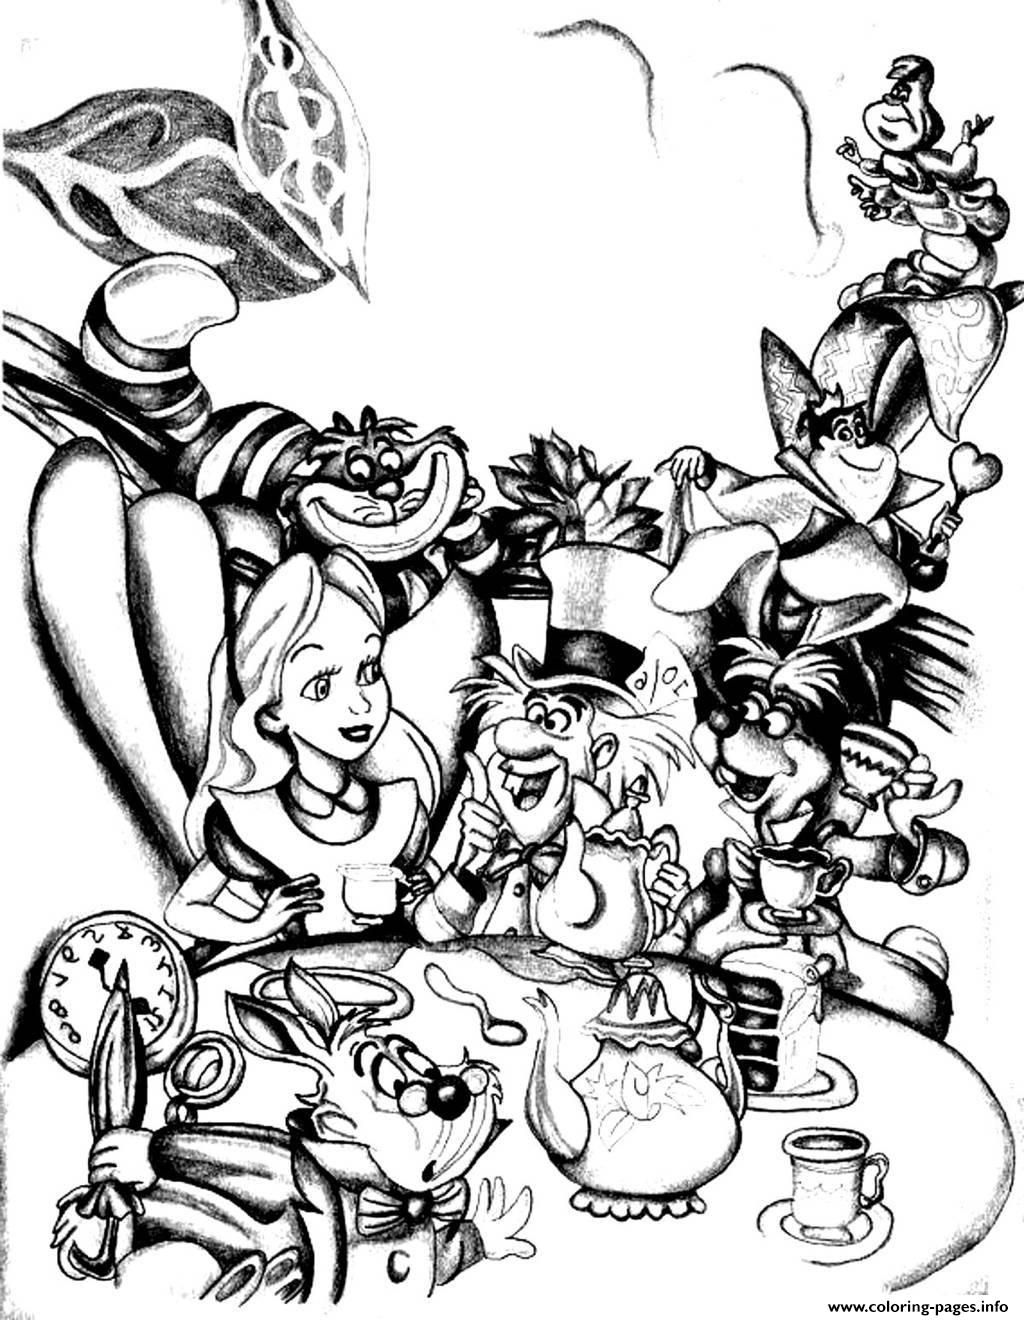 Trippy Alice In Wonderland Coloring Pages at GetDrawings | Free download